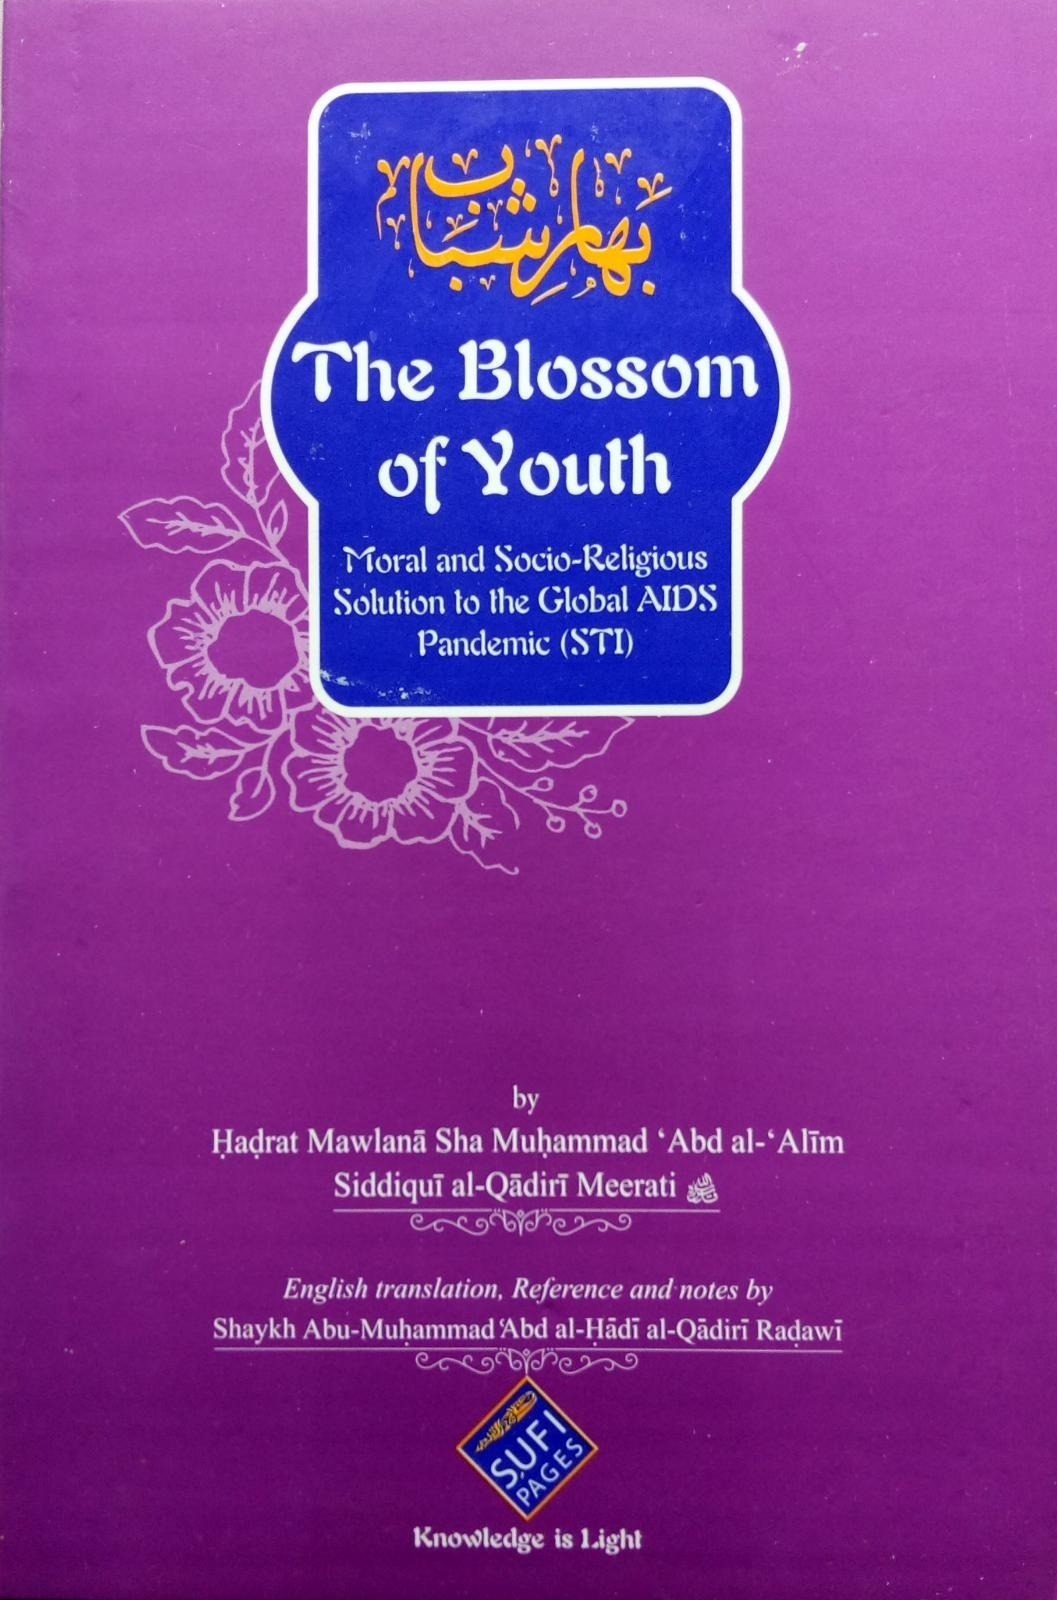 The Blossom of Youth